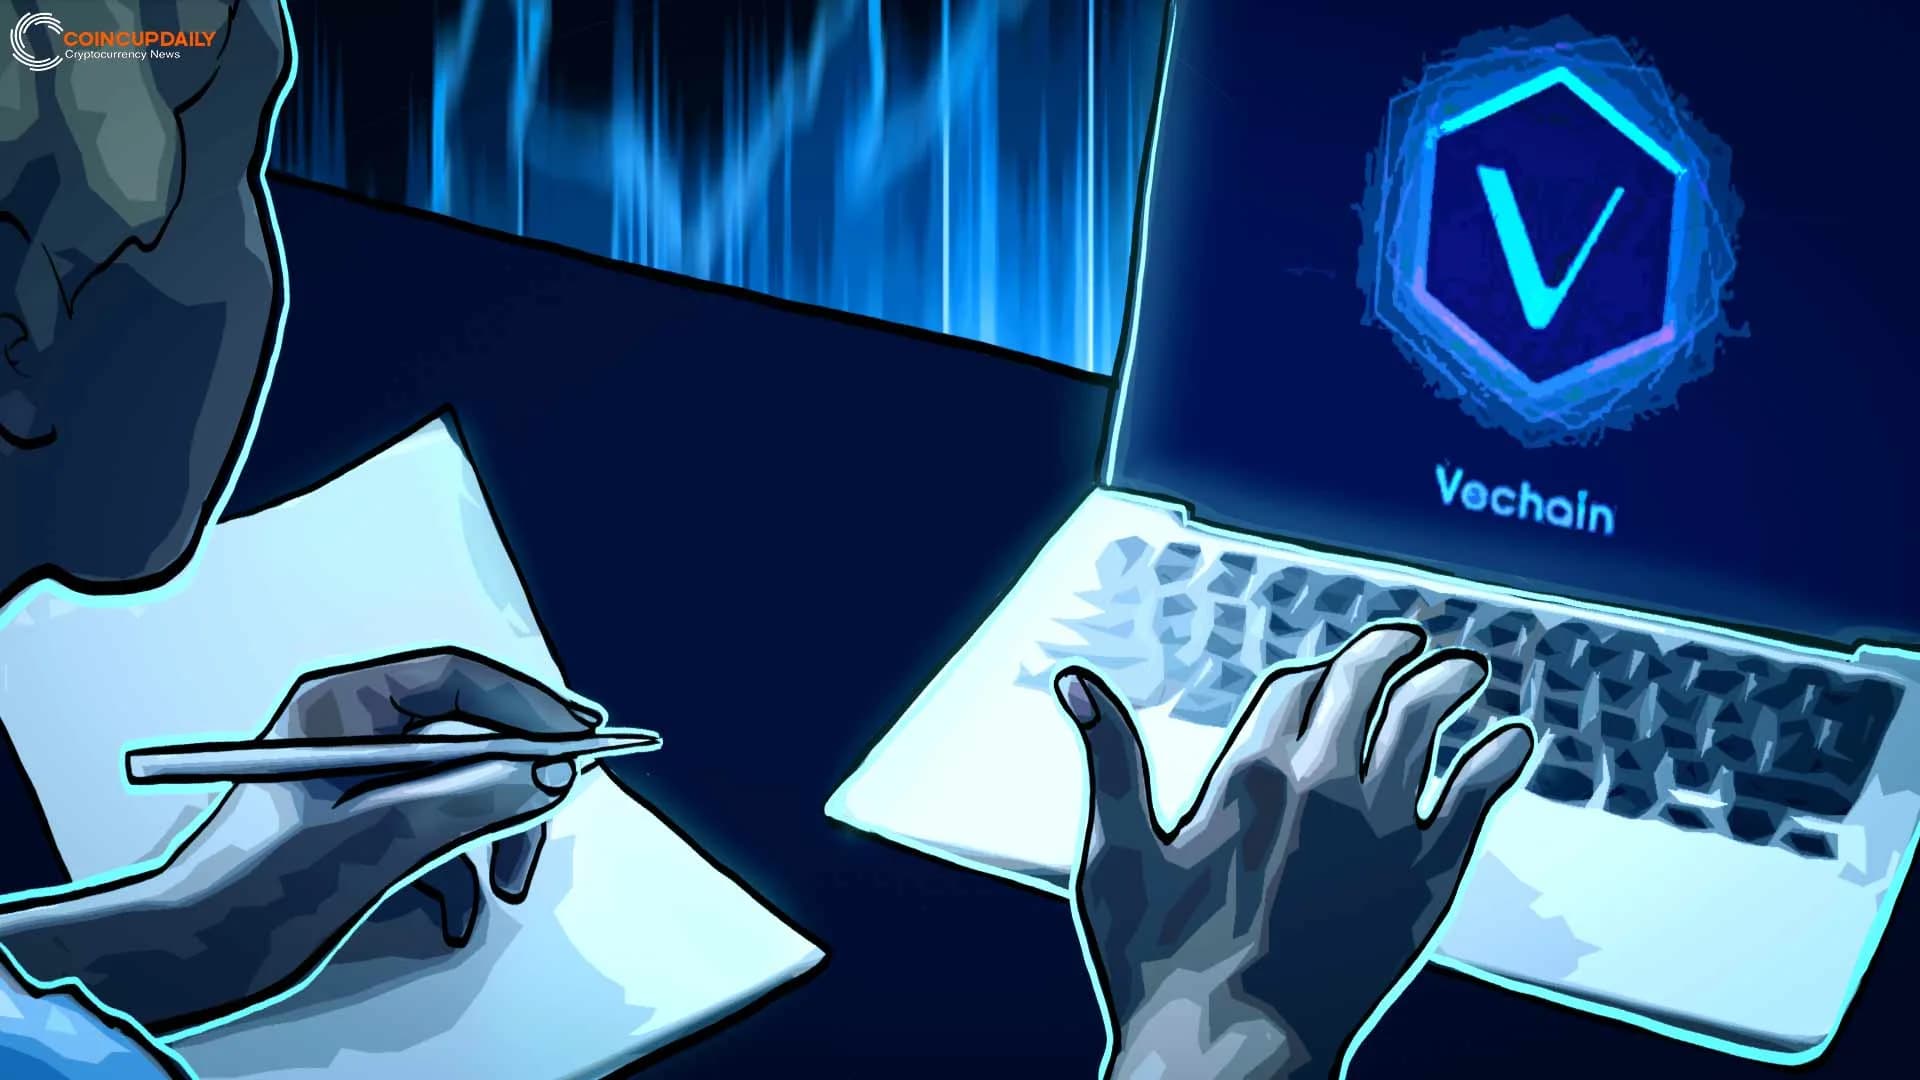 VeChain Introduces Next-Gen Transaction Technology, Paving the Way for Mass Adoption